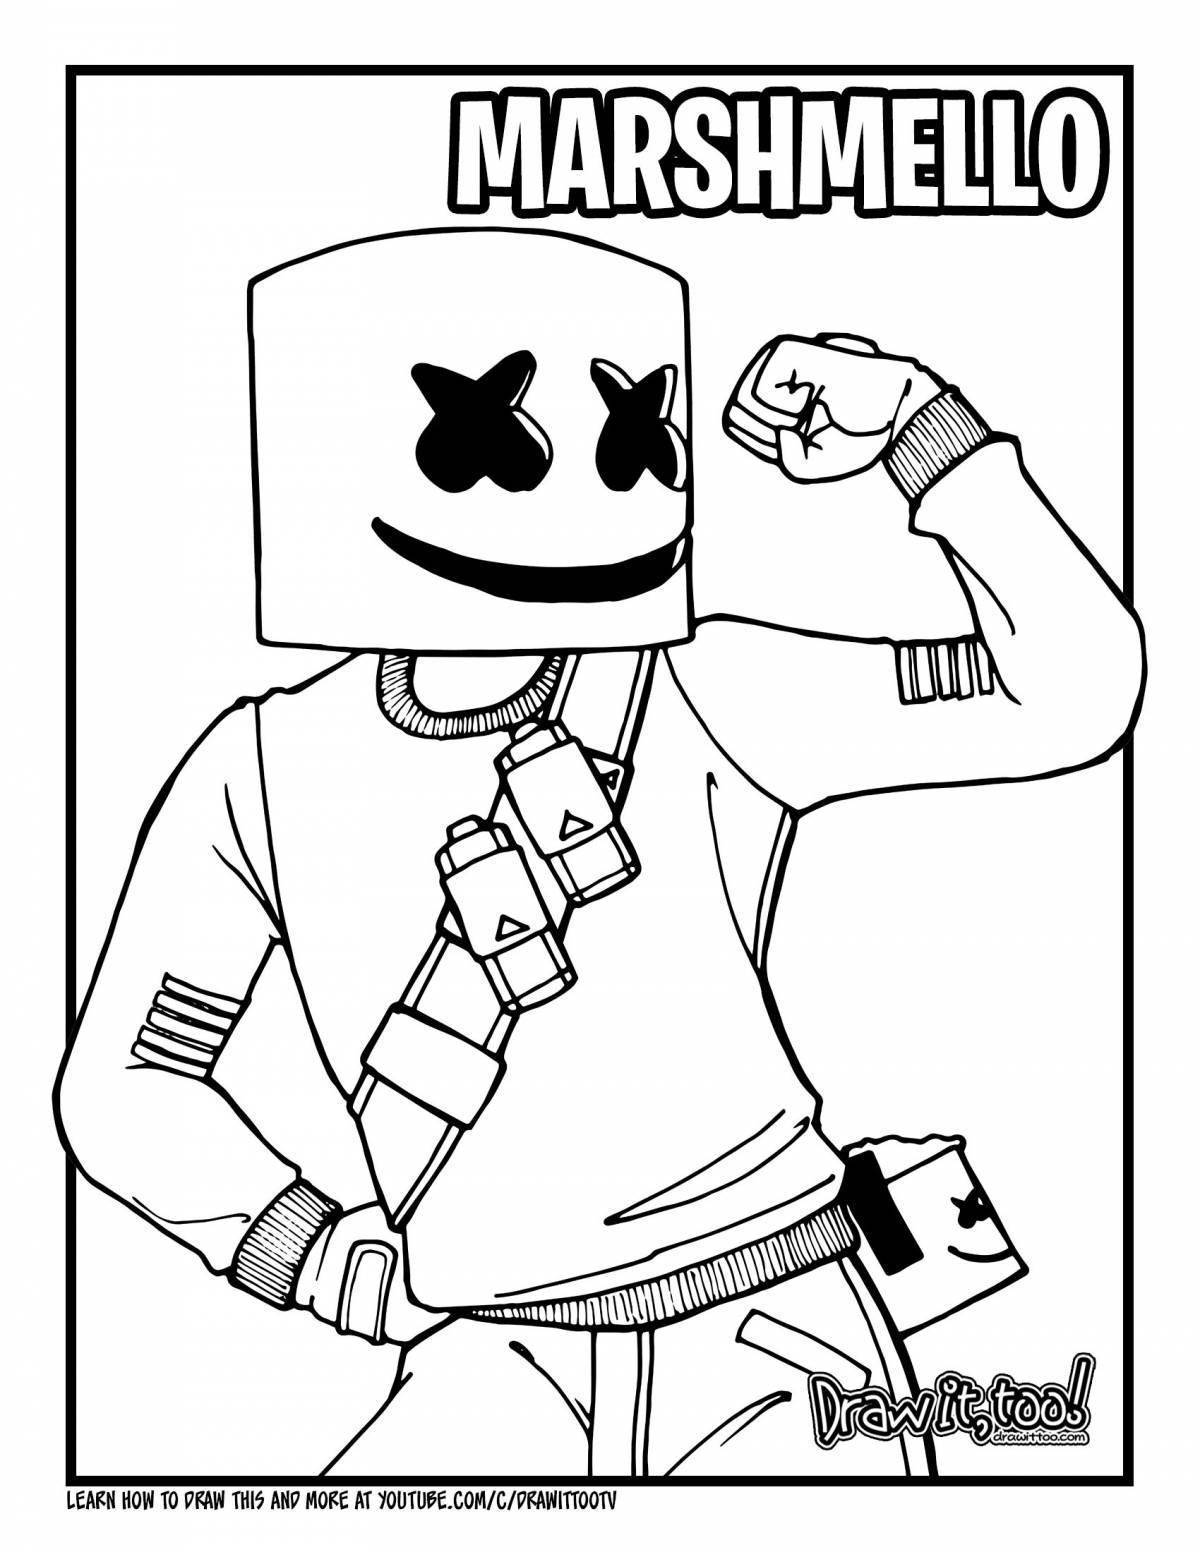 Marshmello coloring pages